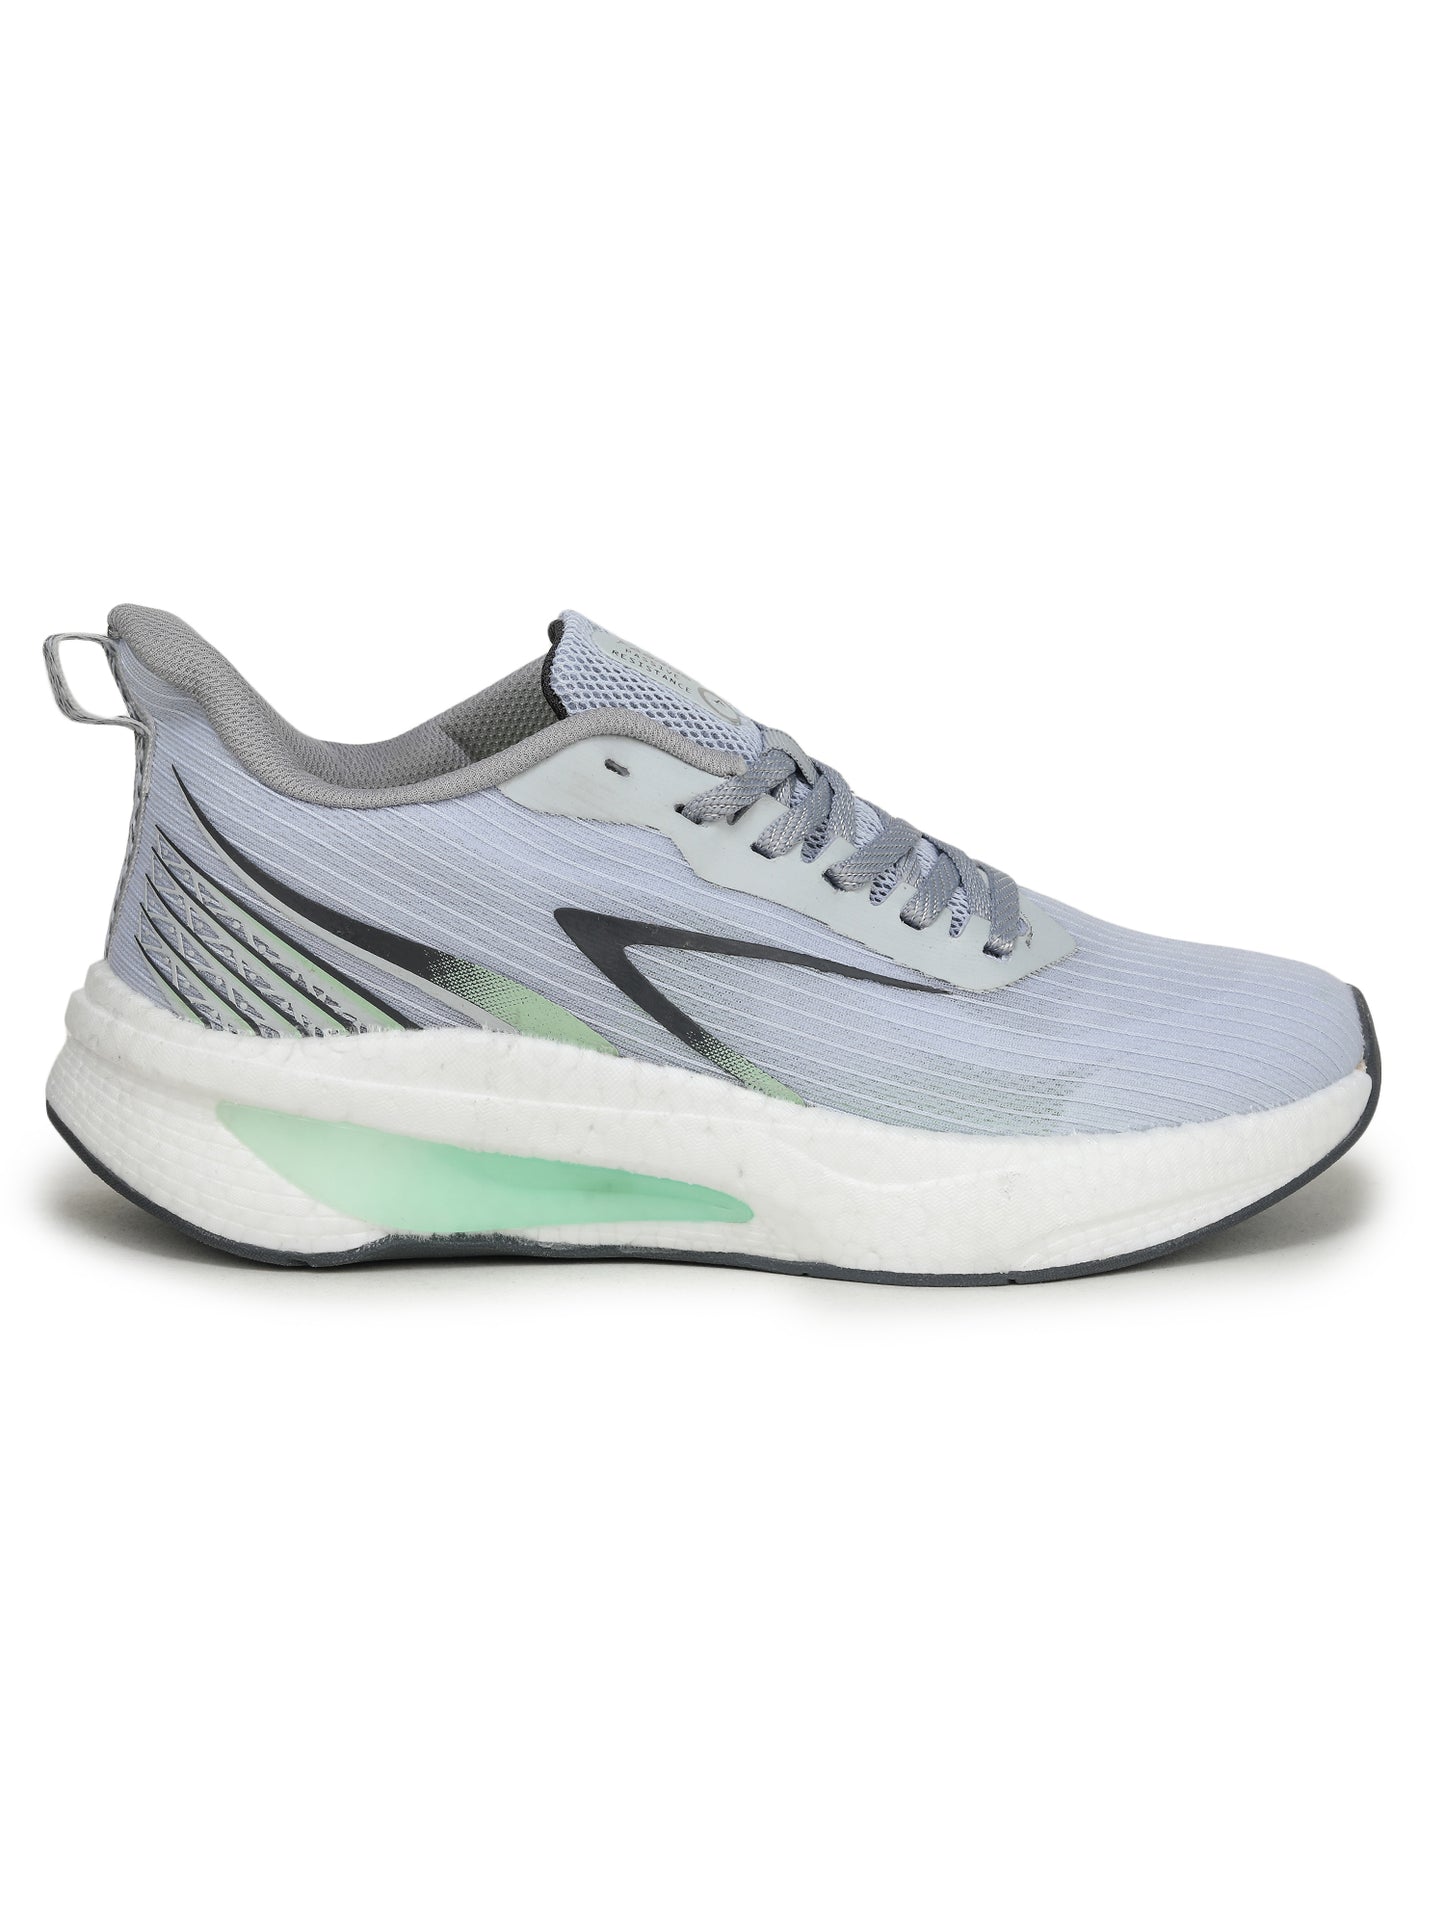 ABROS LASER SPORTS SHOES FOR MEN